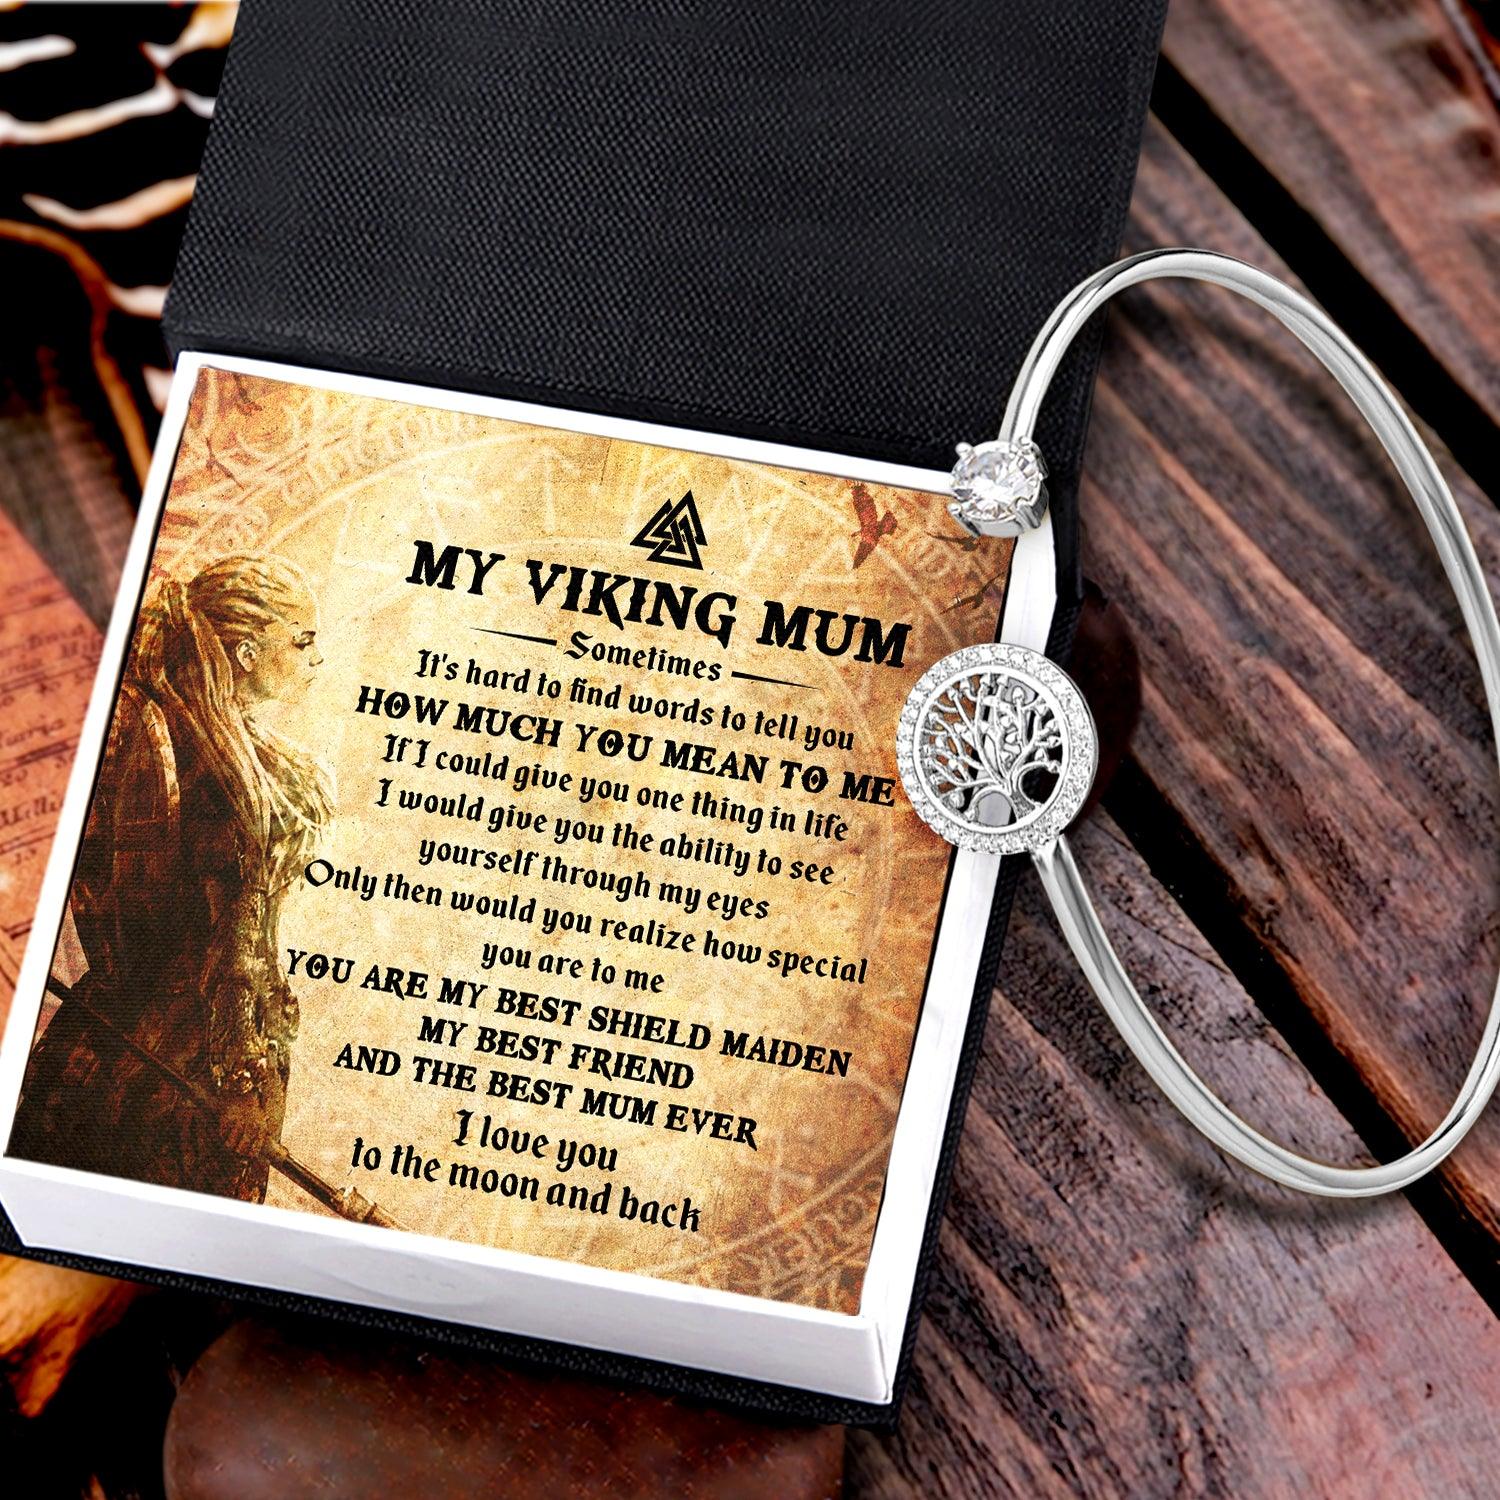 Yggdrasil Bracelet - Viking - To My Viking Mum - I Love You To The Moon And Back - Augbbd19009 - Gifts Holder